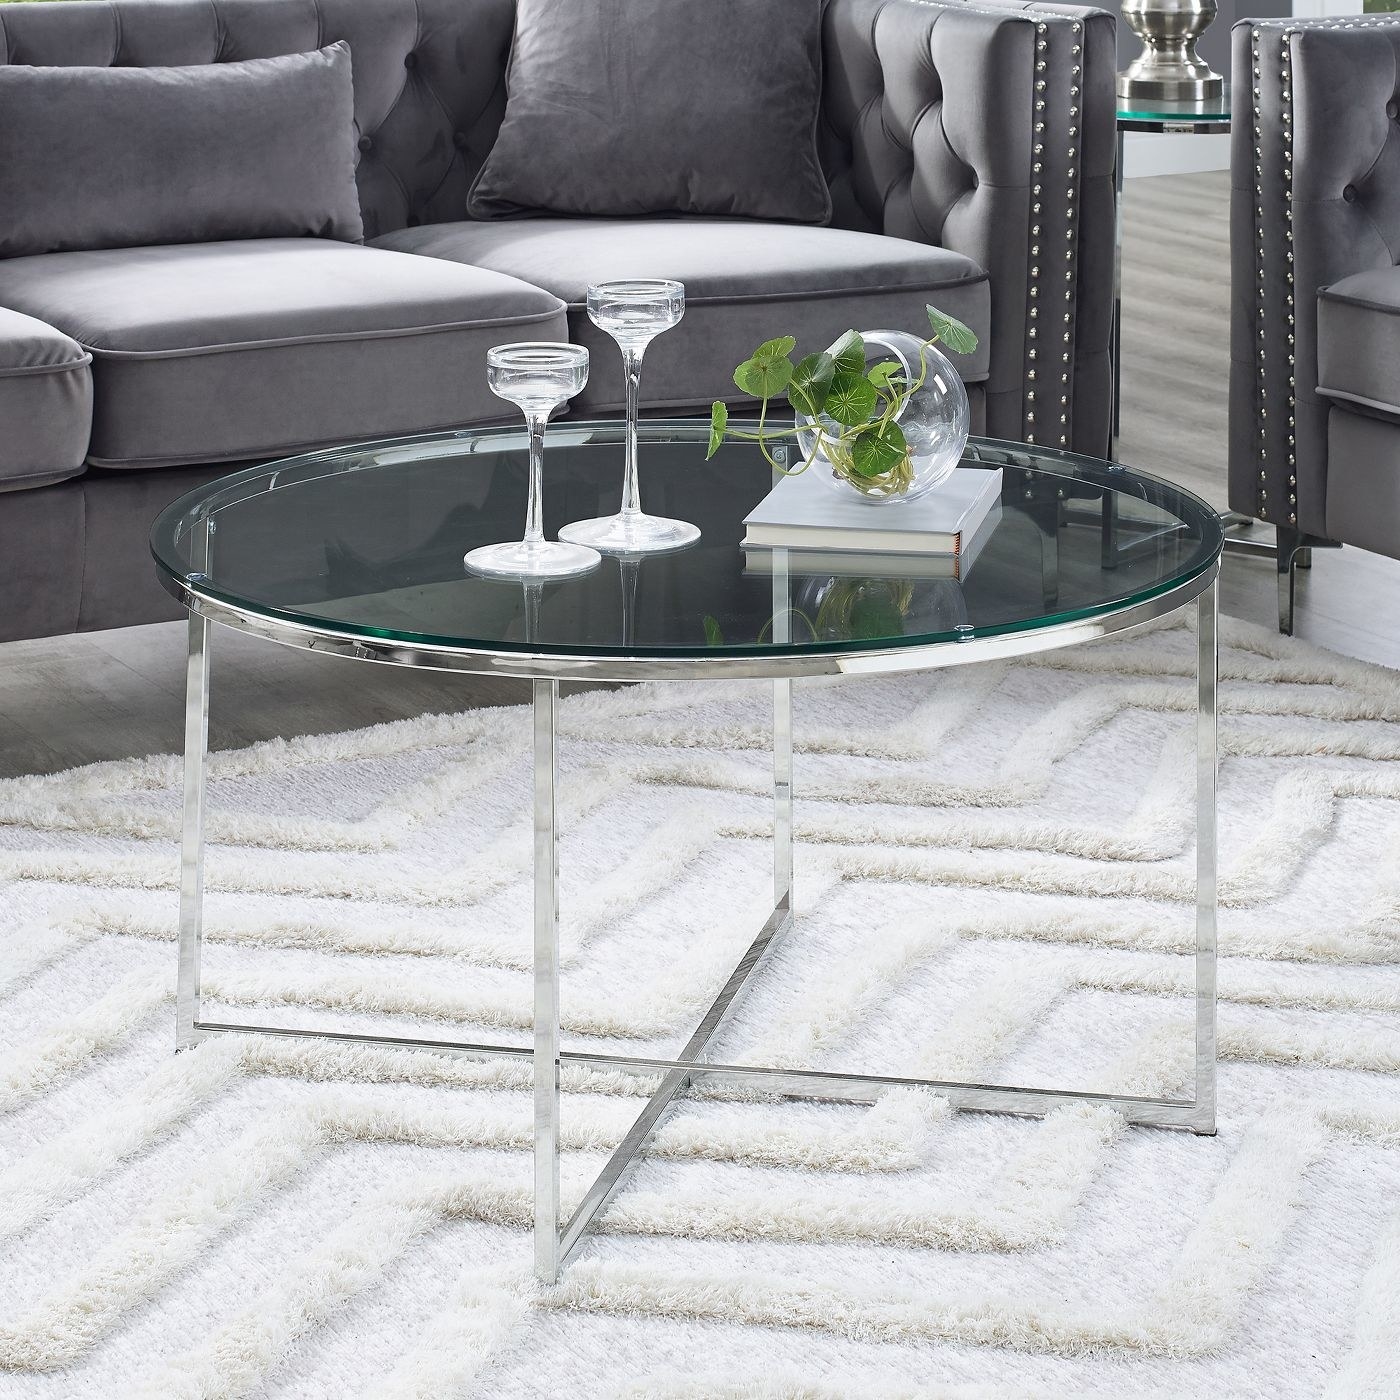 A round glass chrome coffee table